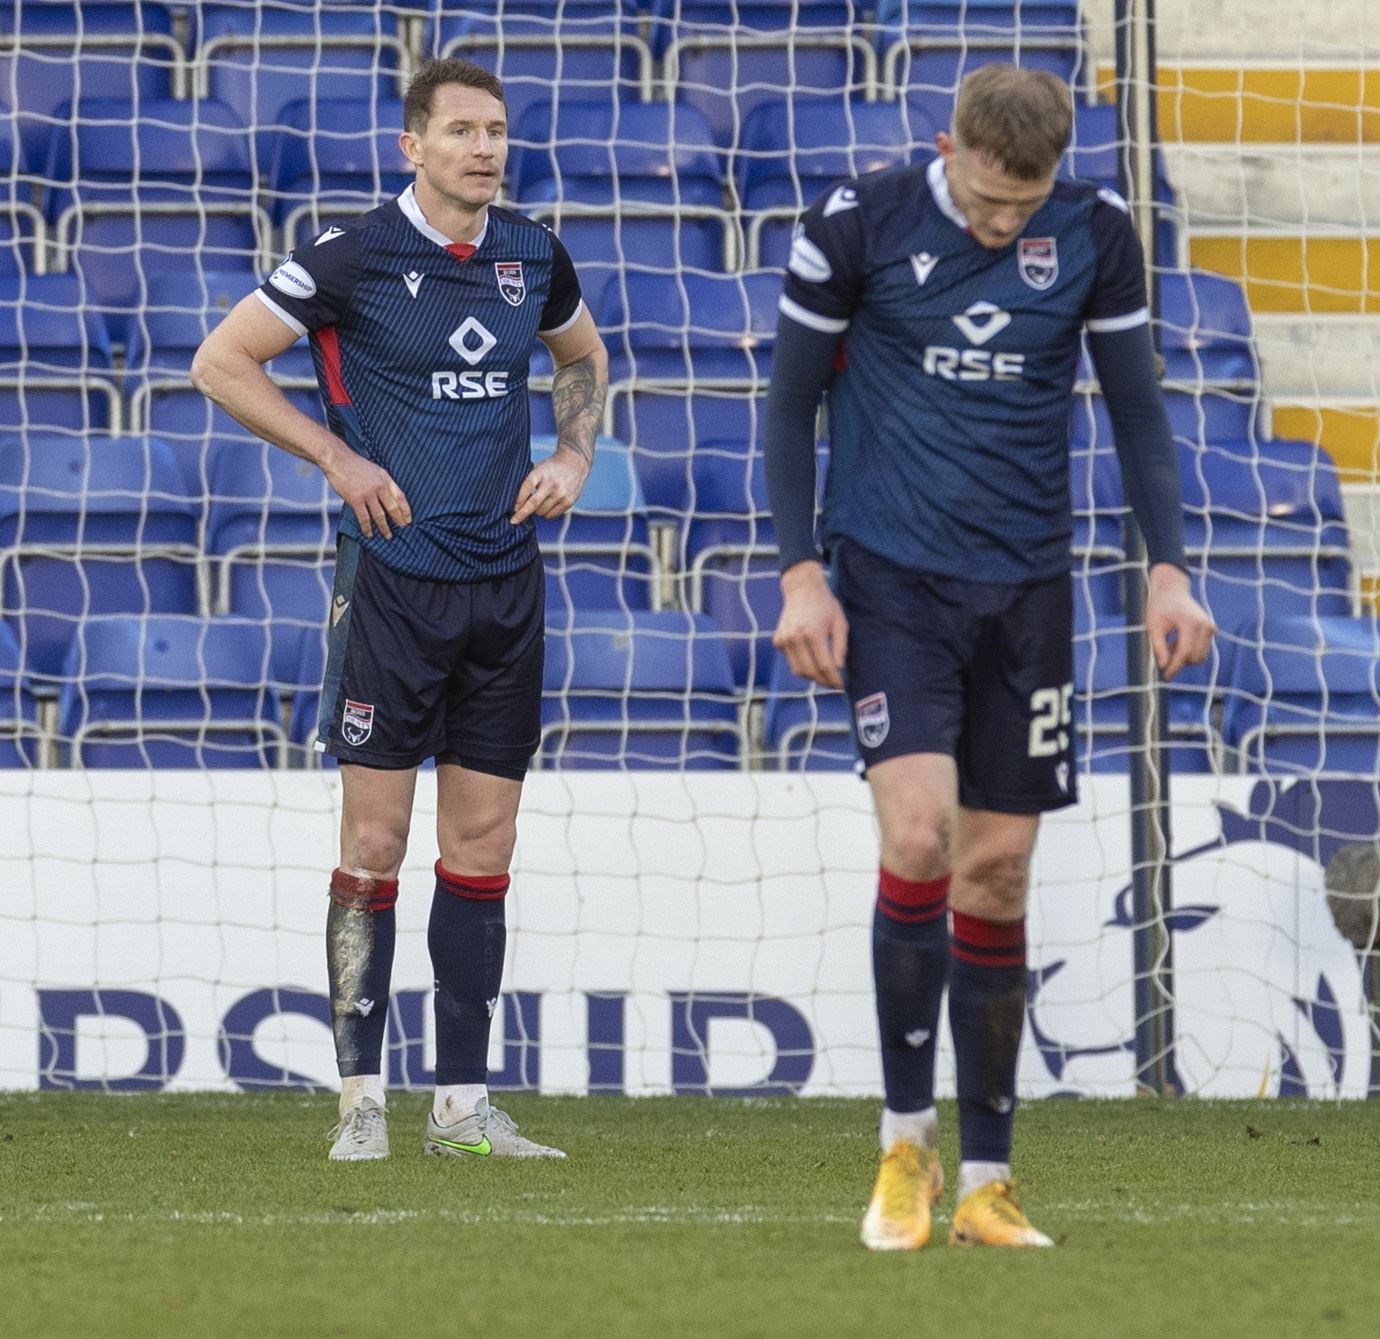 Picture - Ken Macpherson, Inverness. Ross County(0) v Rangers(4). 06.12.20. Ross County's Callum Morris and Coll Donaldson are disappointed after the late goal from Rangers' Jermain Defoe.